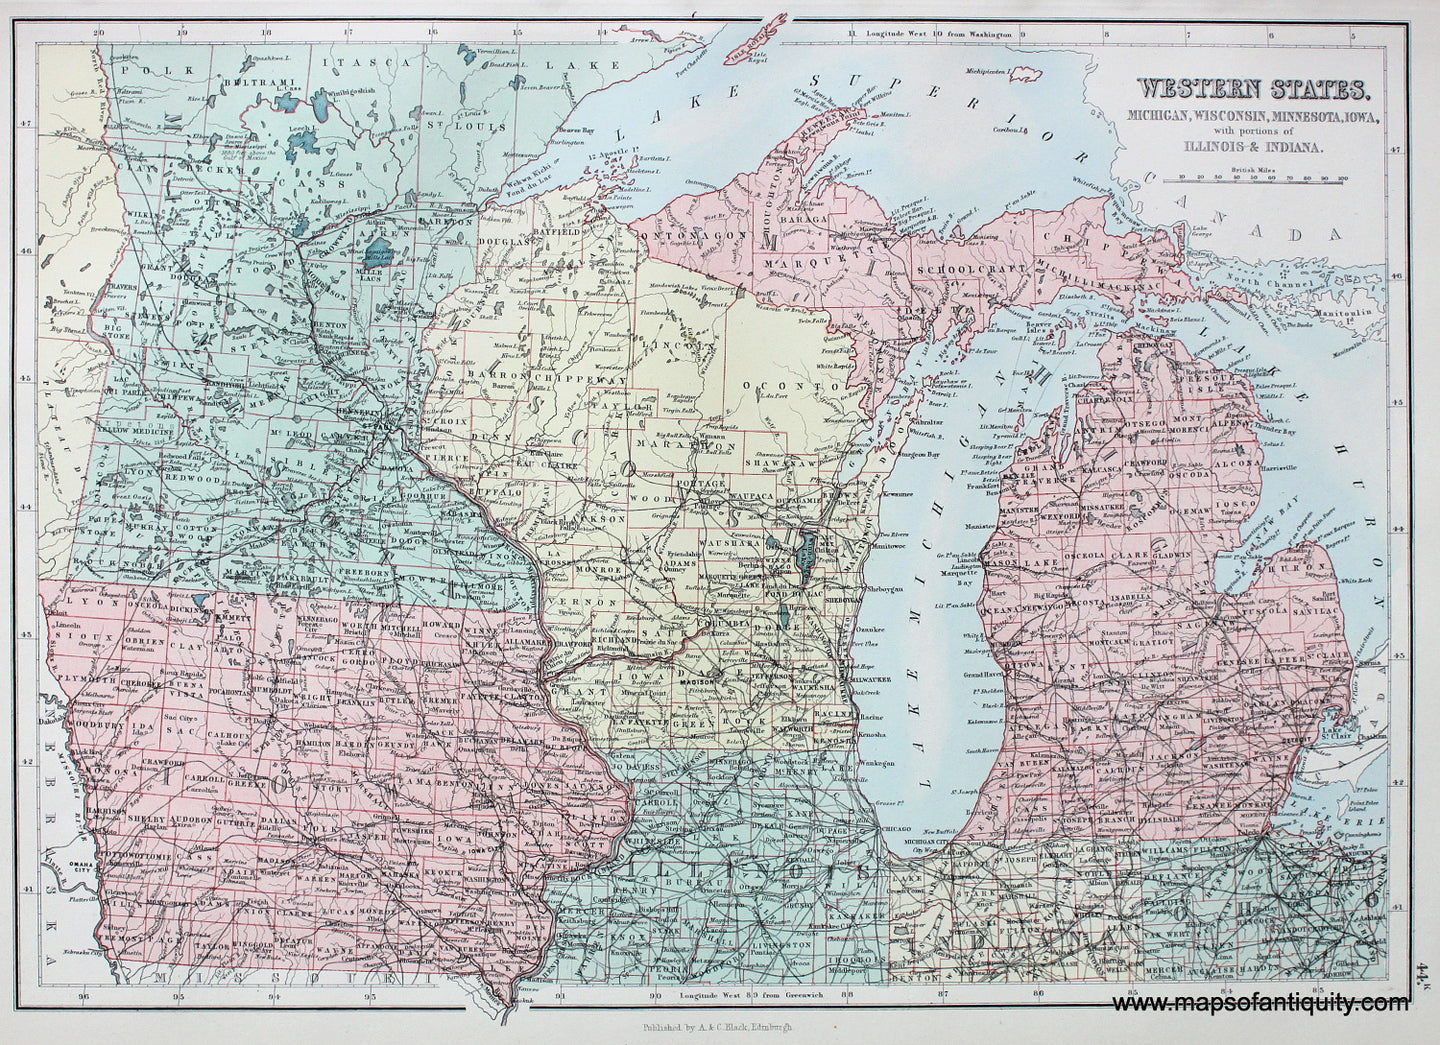 Antique-printed-color-Map-Western-States-Michigan-Wisconsin-Minnesota-Iowa-with-portions-of-Illinois-&-Indiana-**********-United-States-Midwest-1879-Black-Maps-Of-Antiquity